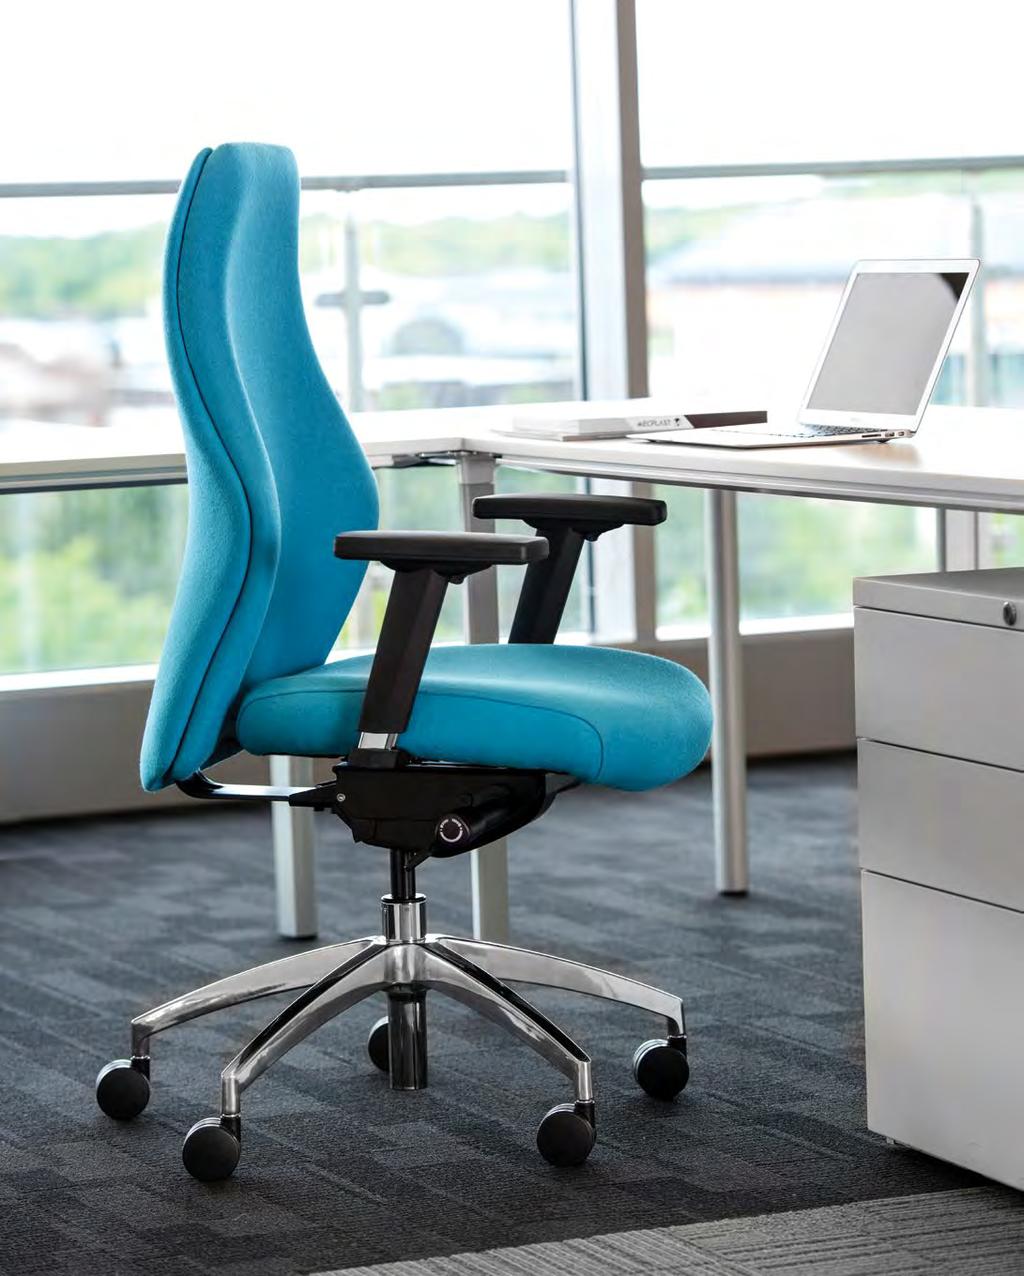 High back and mid back task chairs and matching cantilever visitor chair Synchronised mechanism providing freefloat back action, seat and back in 2:1 ratio, lockable